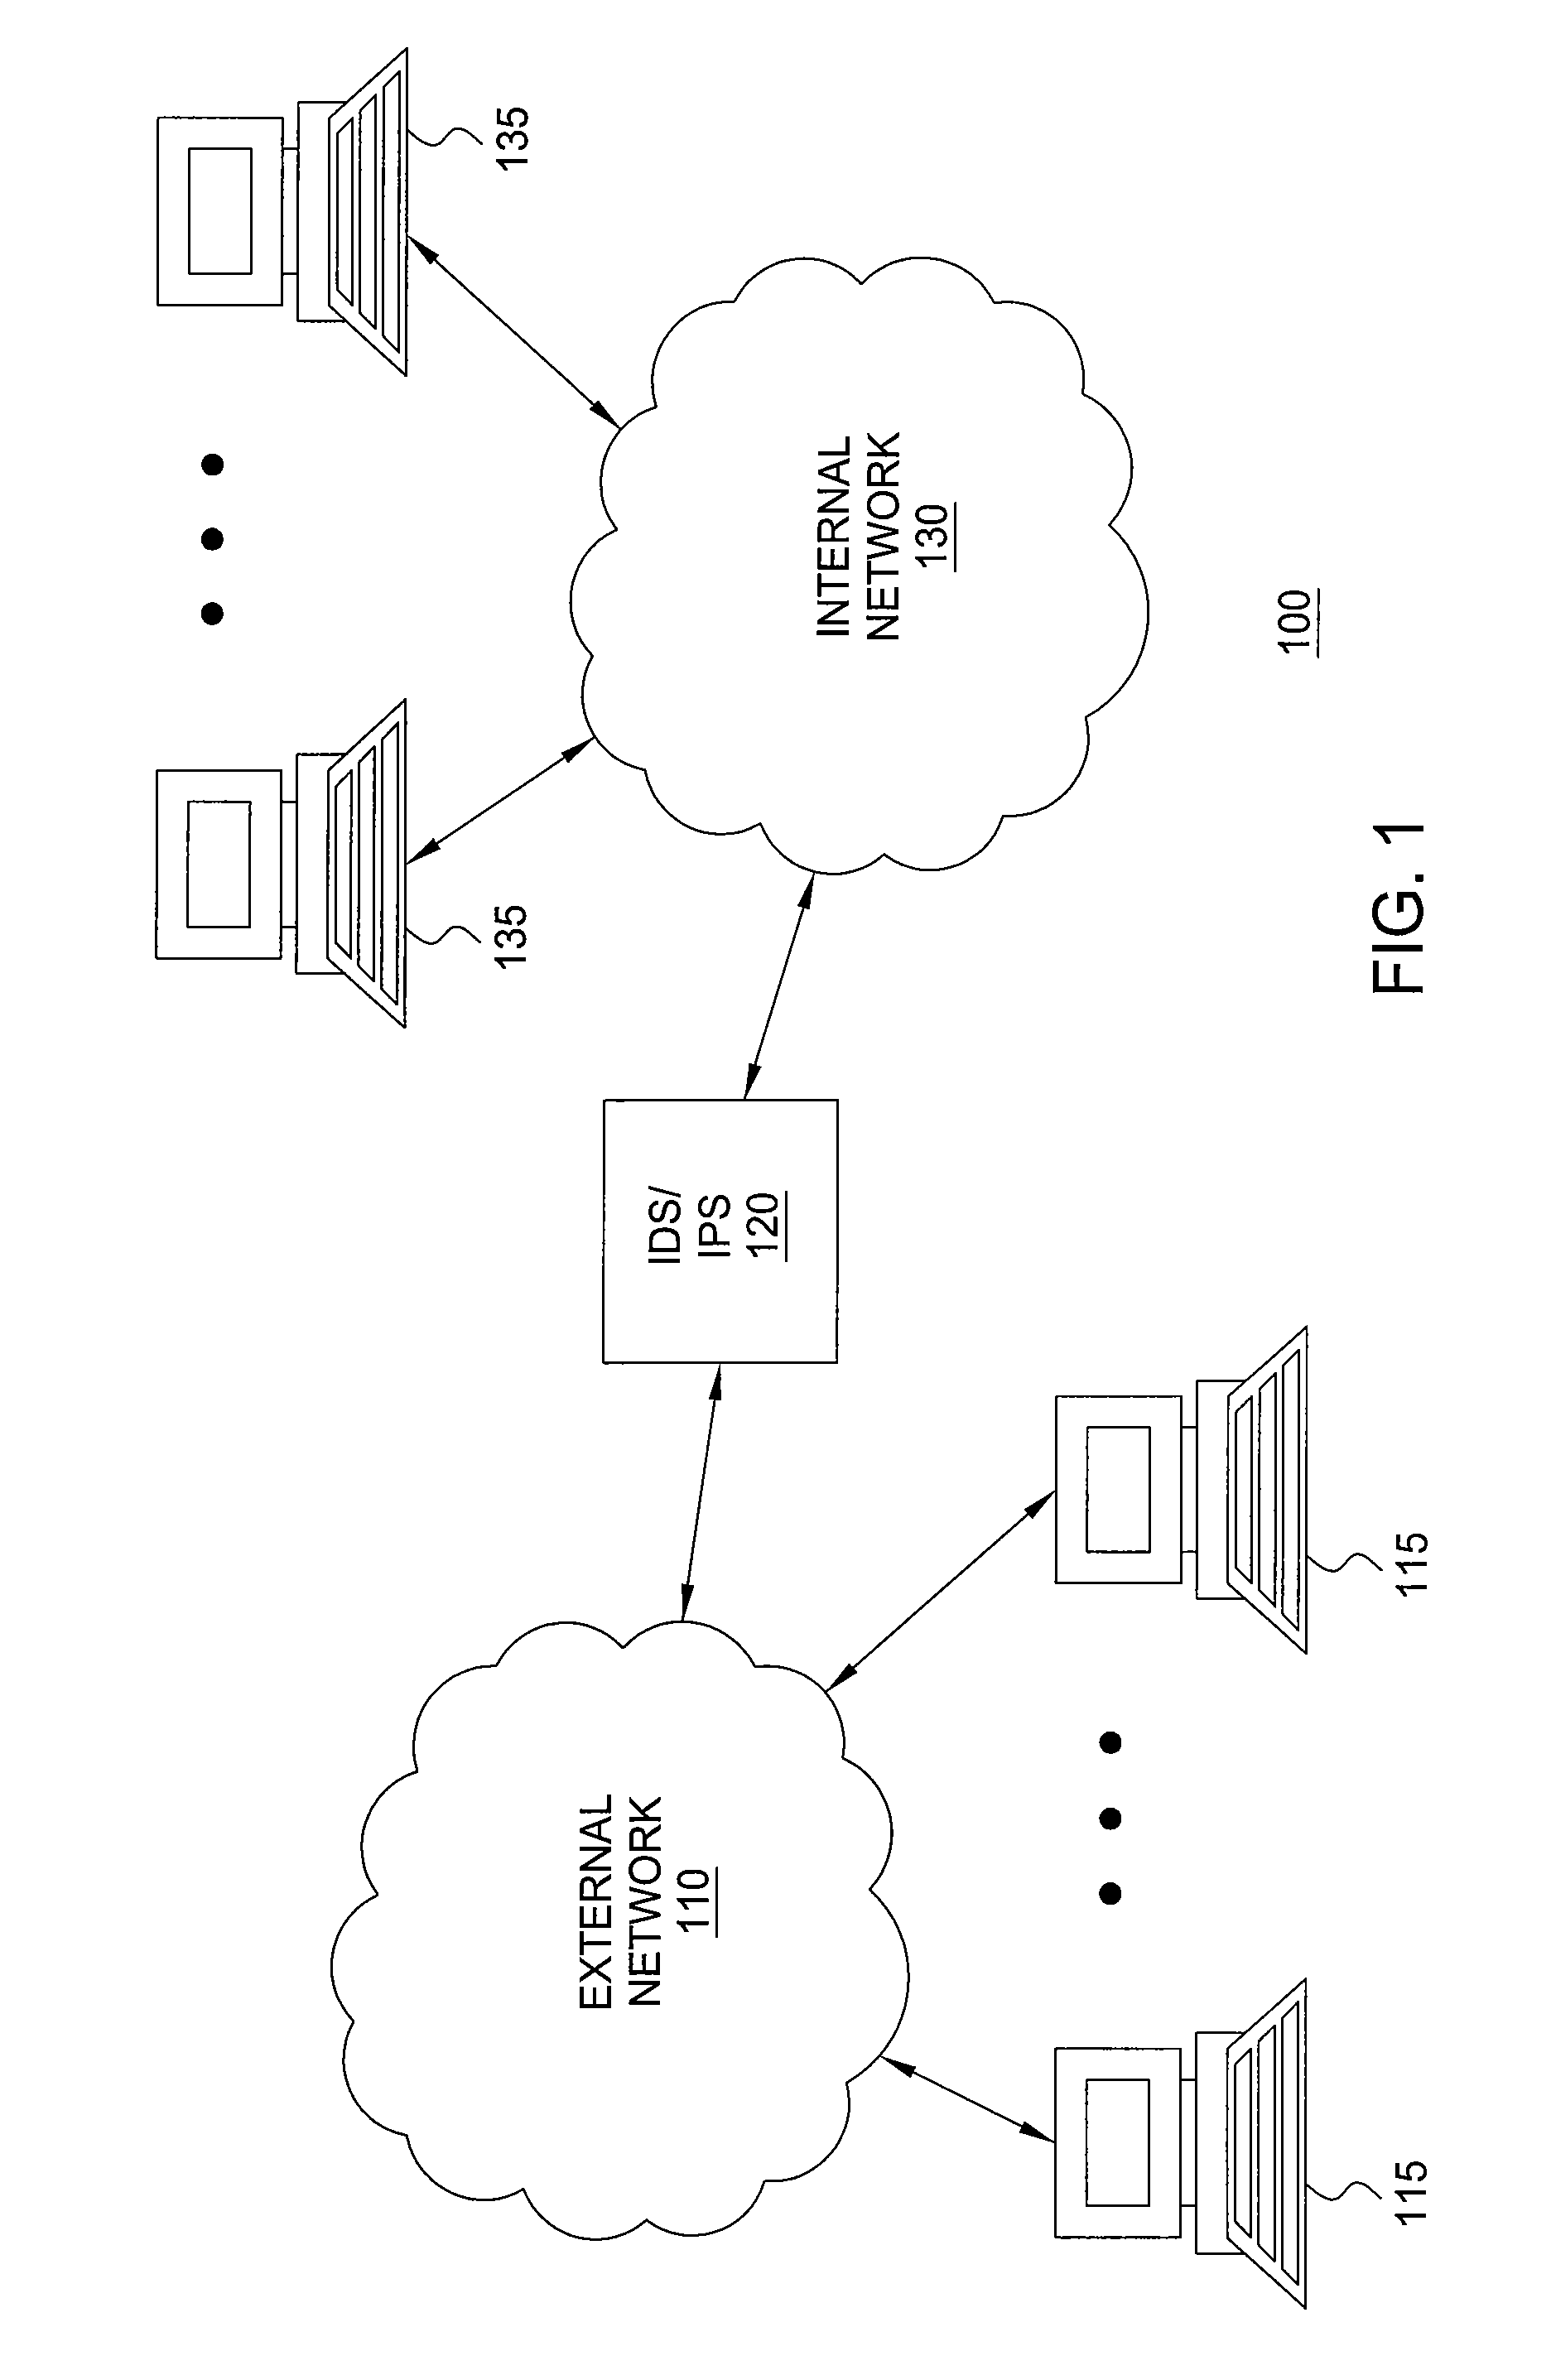 Method and apparatus for pattern matching for intrusion detection/prevention systems